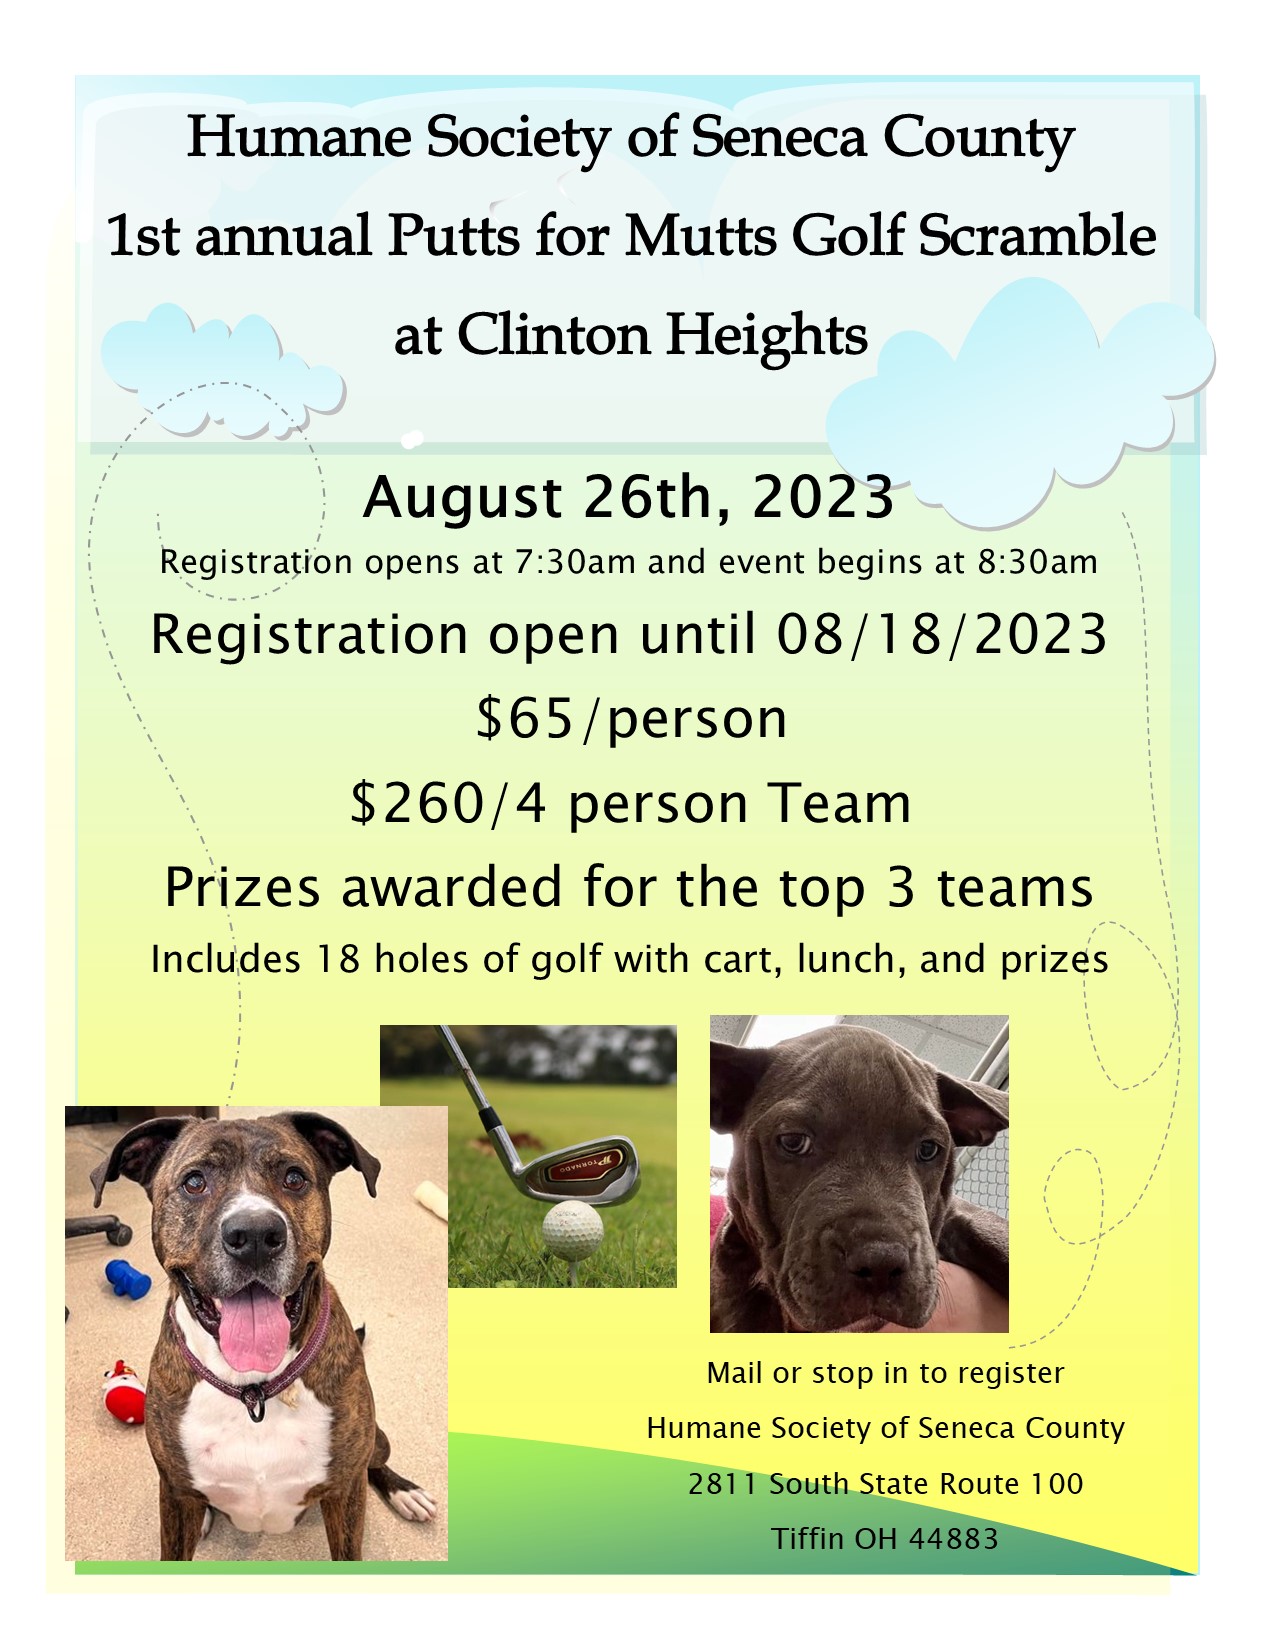 1st Annual Putts for Mutts Golf Scramble